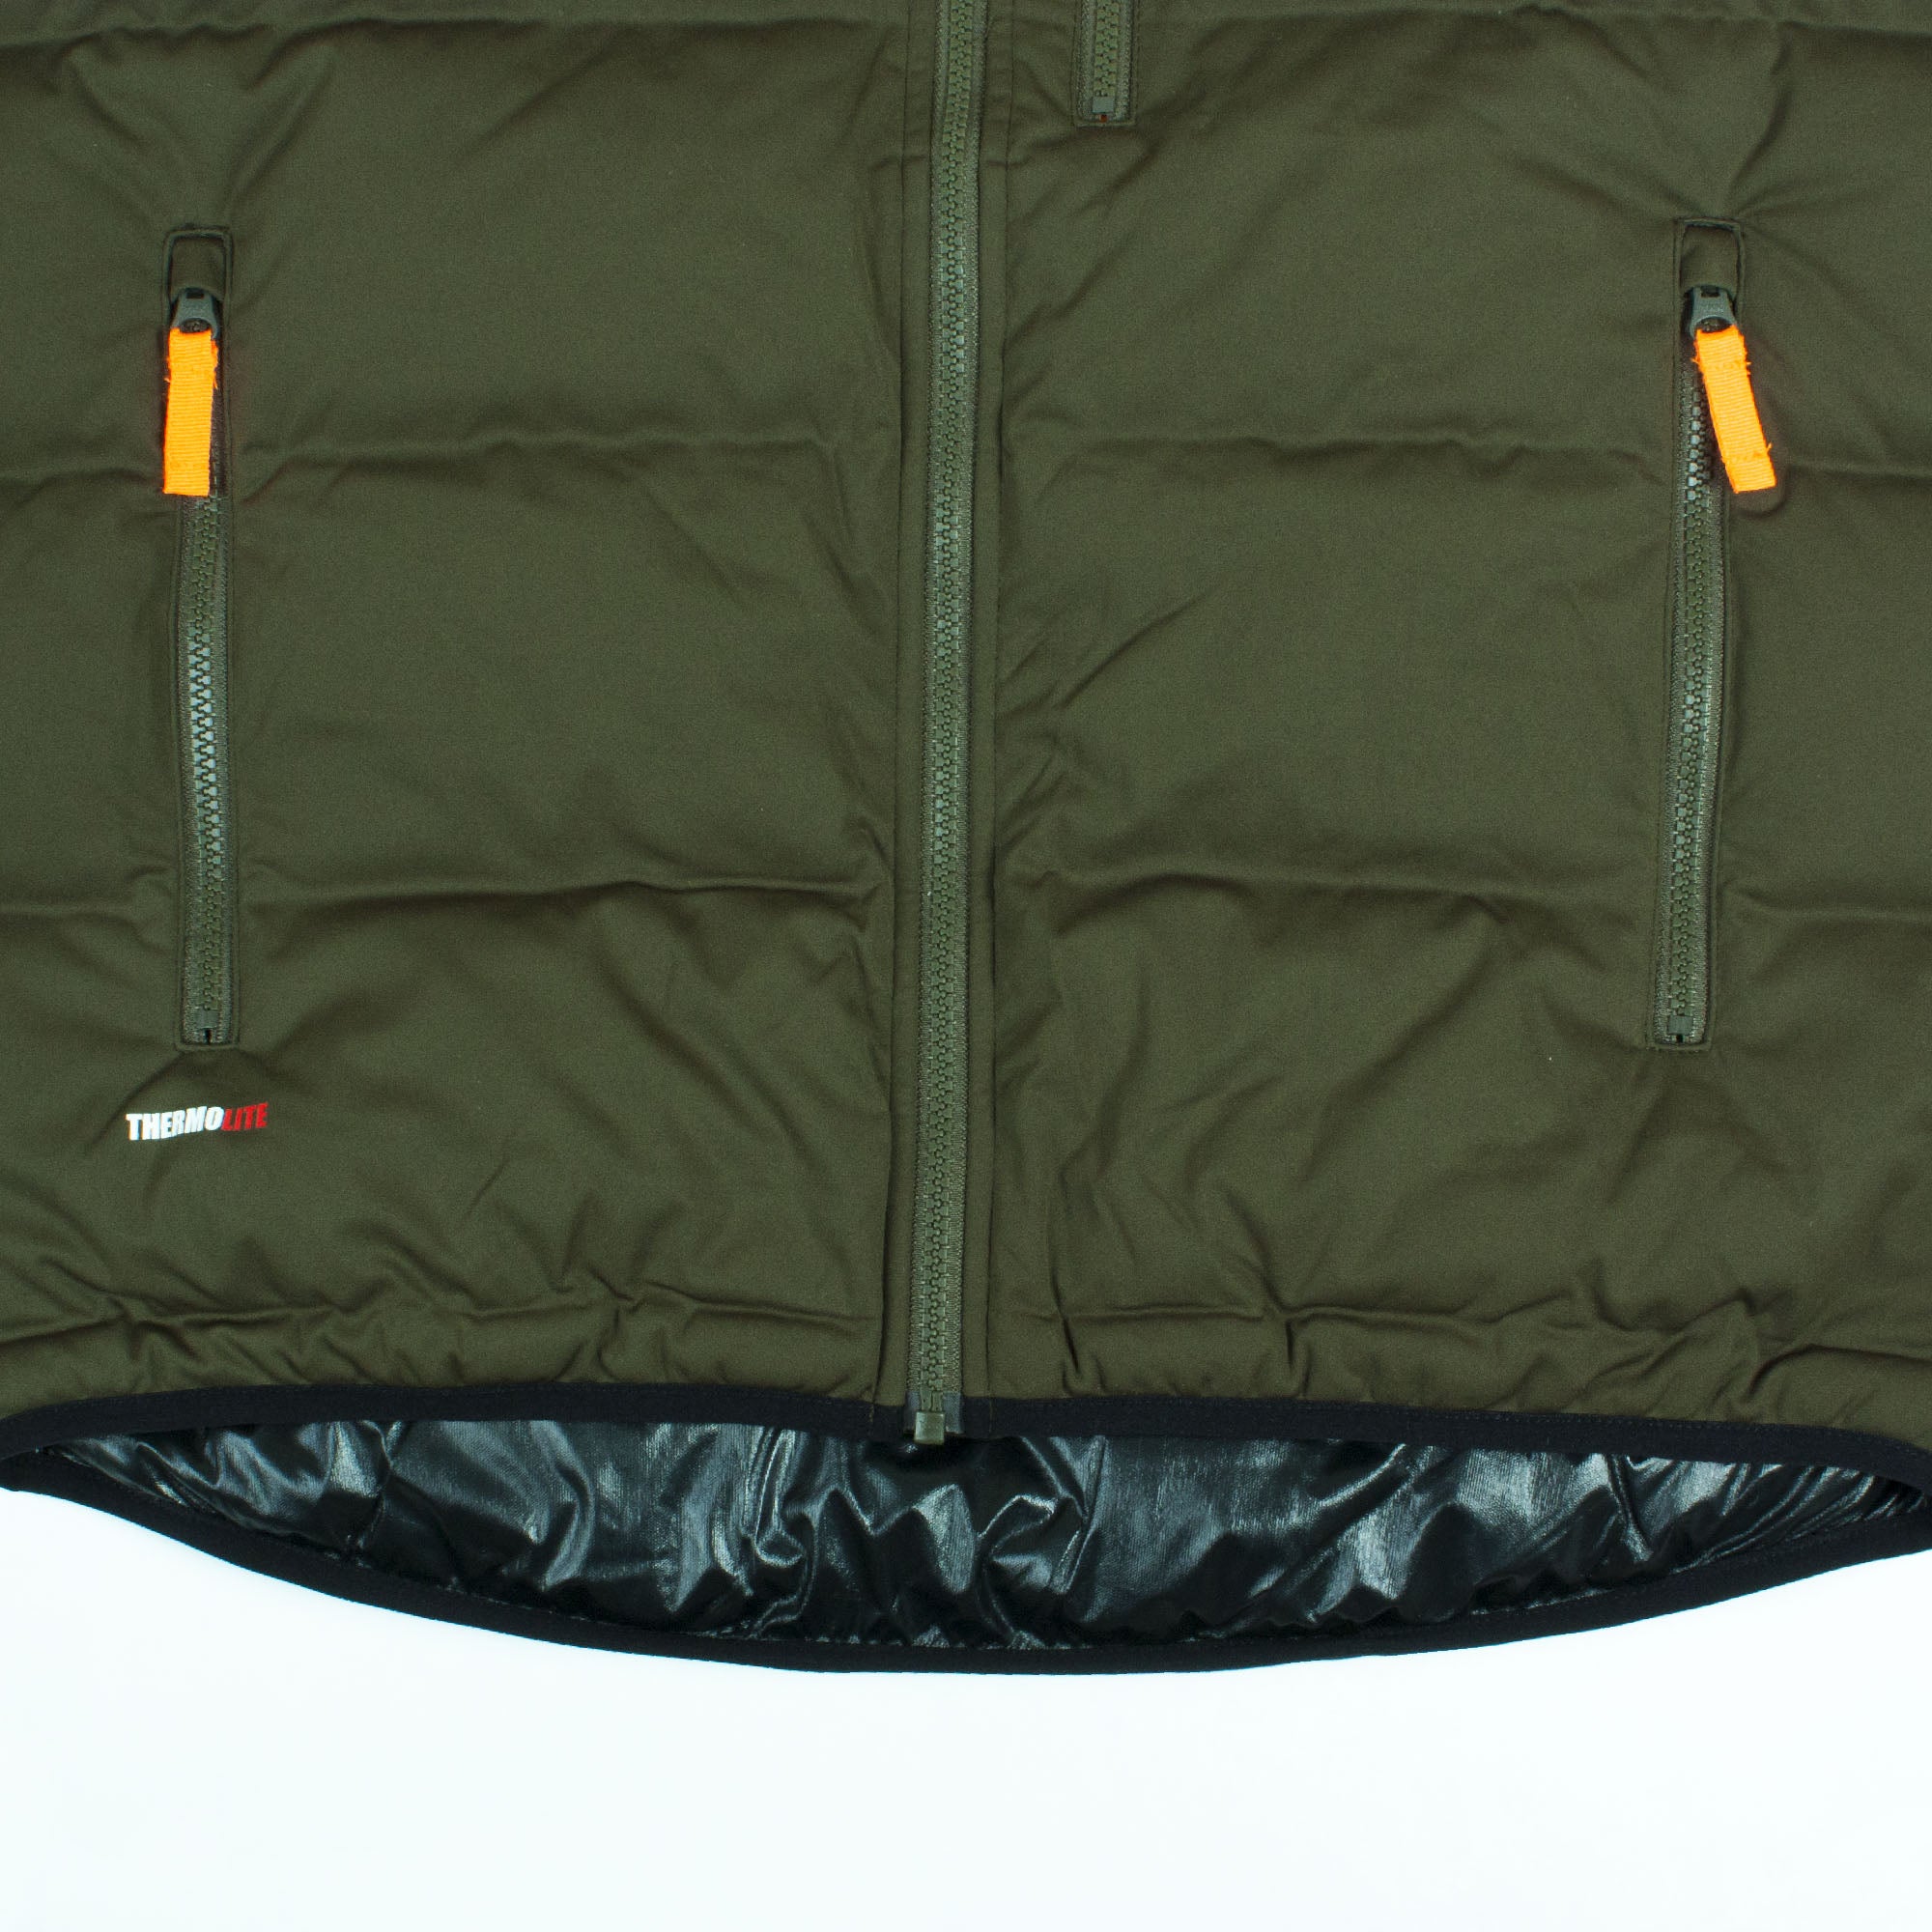 Stoney Creek Thermolite Jacket -  - Mansfield Hunting & Fishing - Products to prepare for Corona Virus